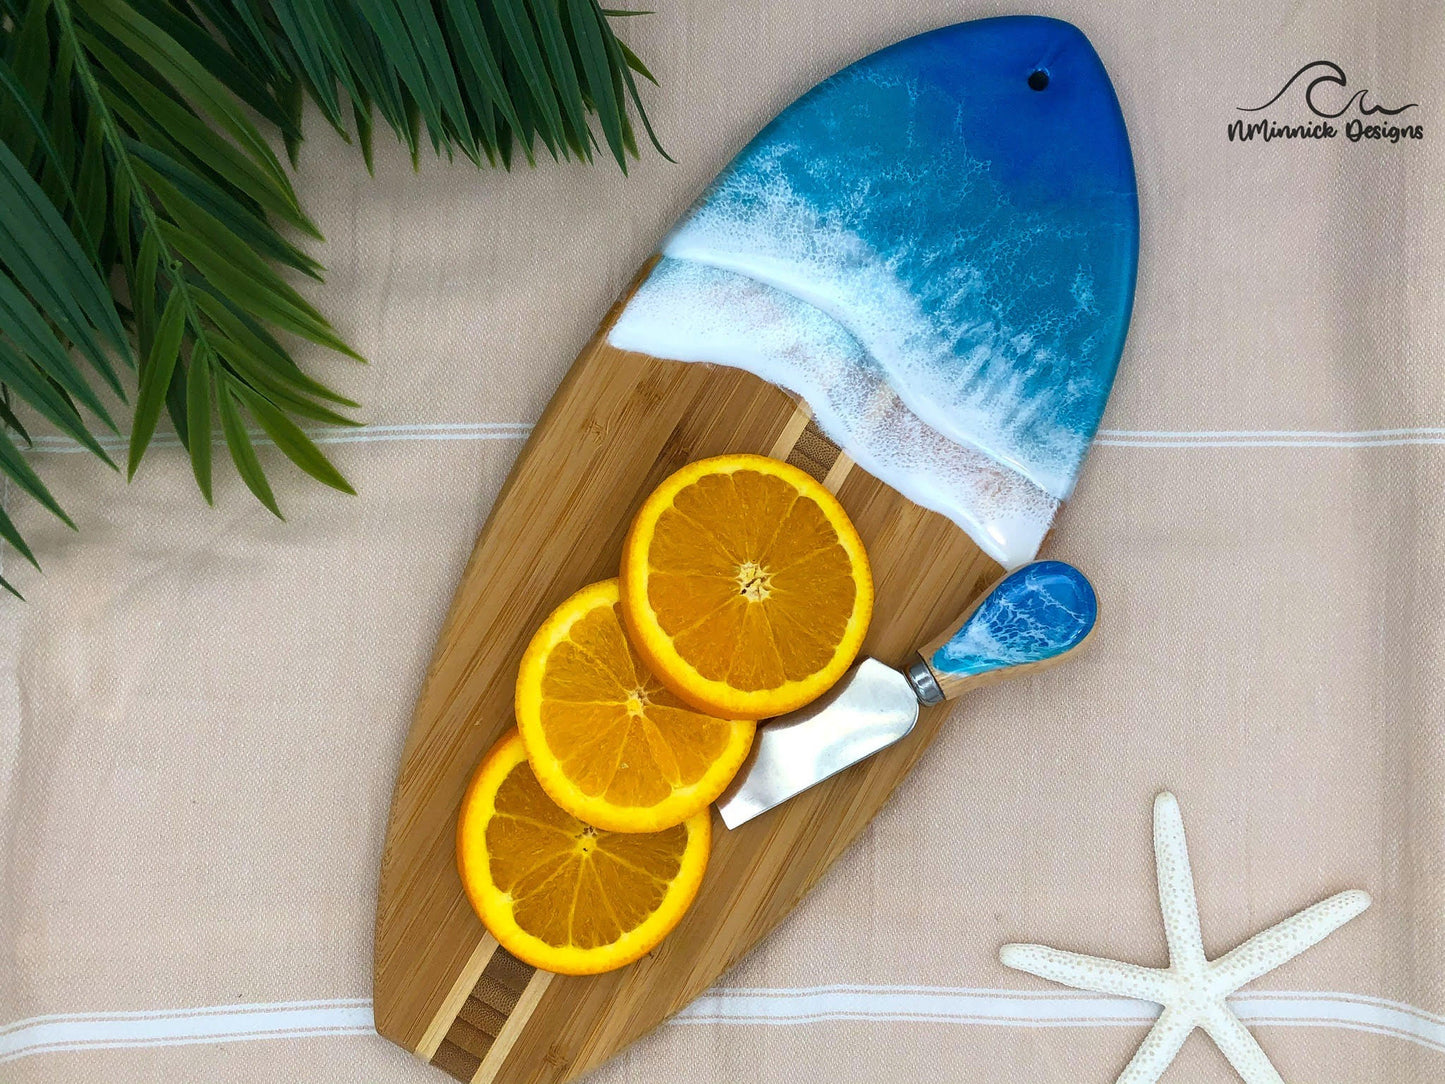 Surfboard-shaped bamboo charcuterie board. Top portion covered in blue and teal ocean resin art resembling the waves of the ocean.  Laying on a tan beach towel next to a natural starfish (not included) and adorned with three orange slices and a matching cheese knife (not included).